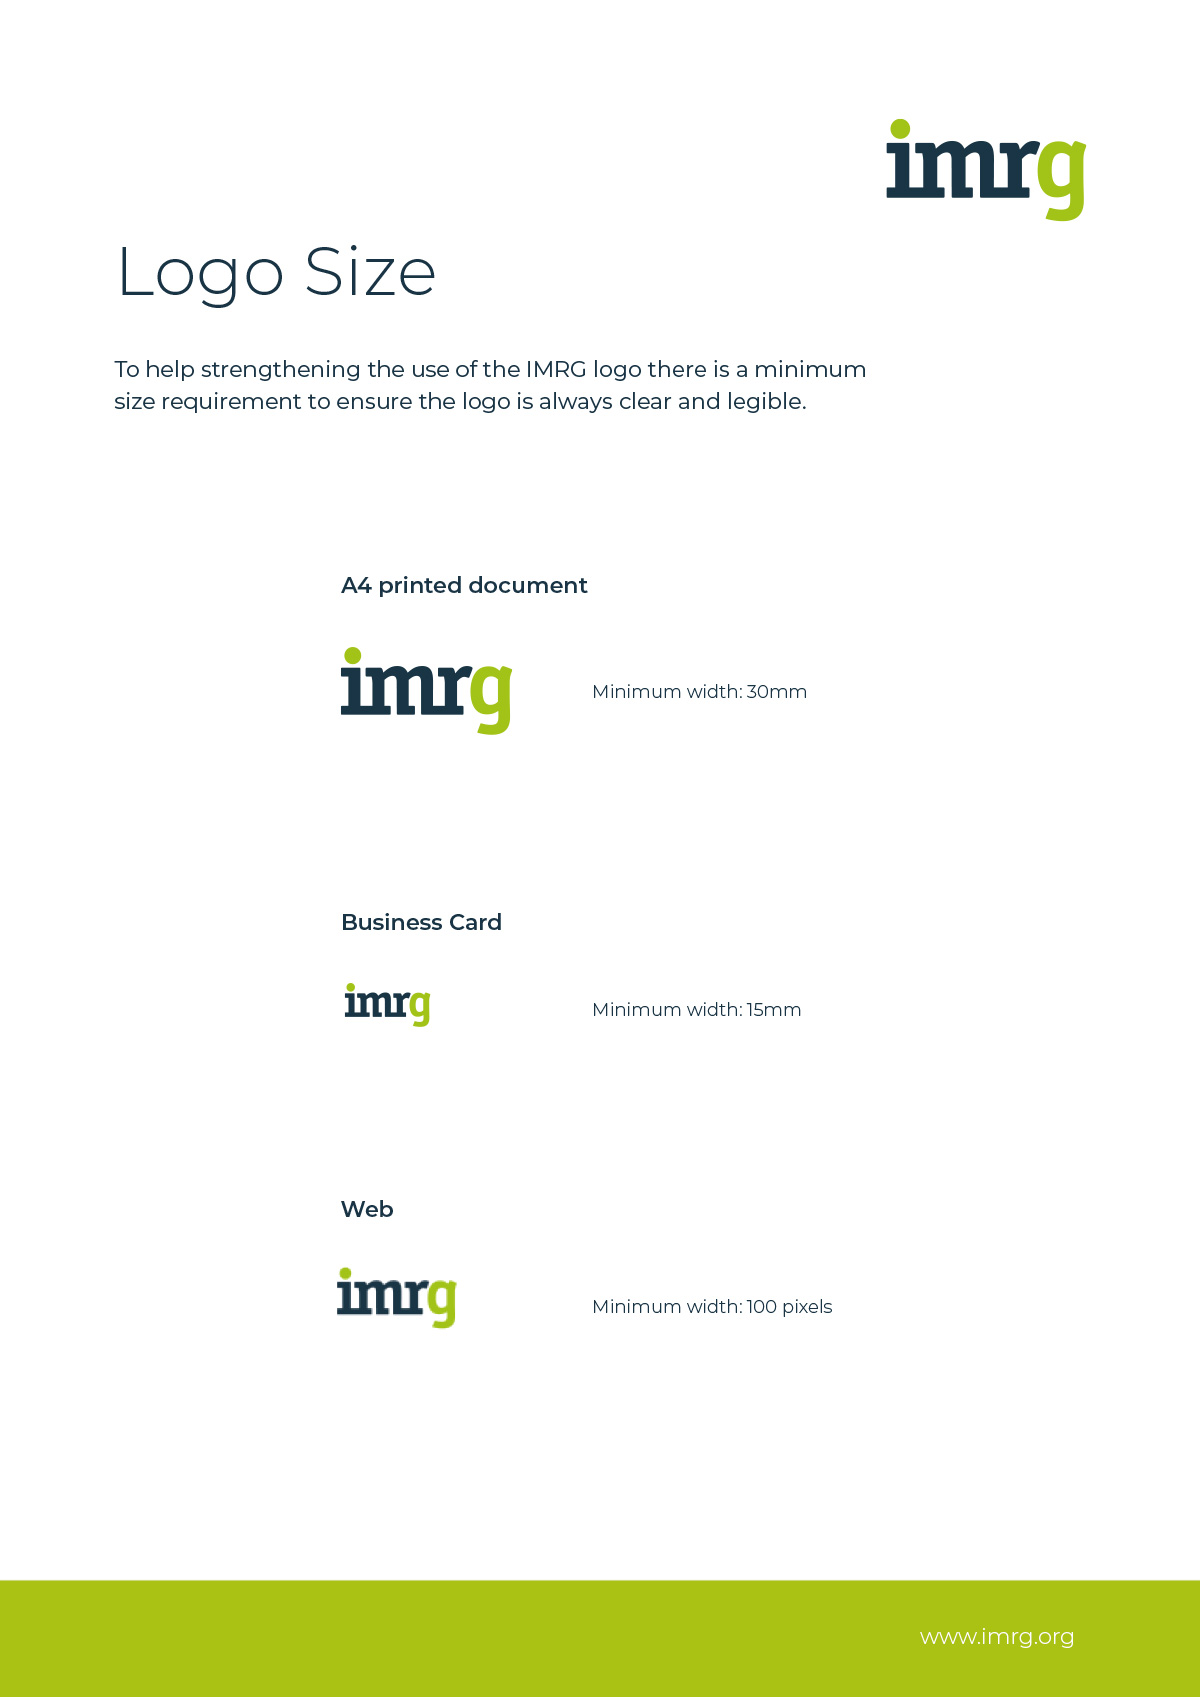 IMRG Corporate identity before redesign 1